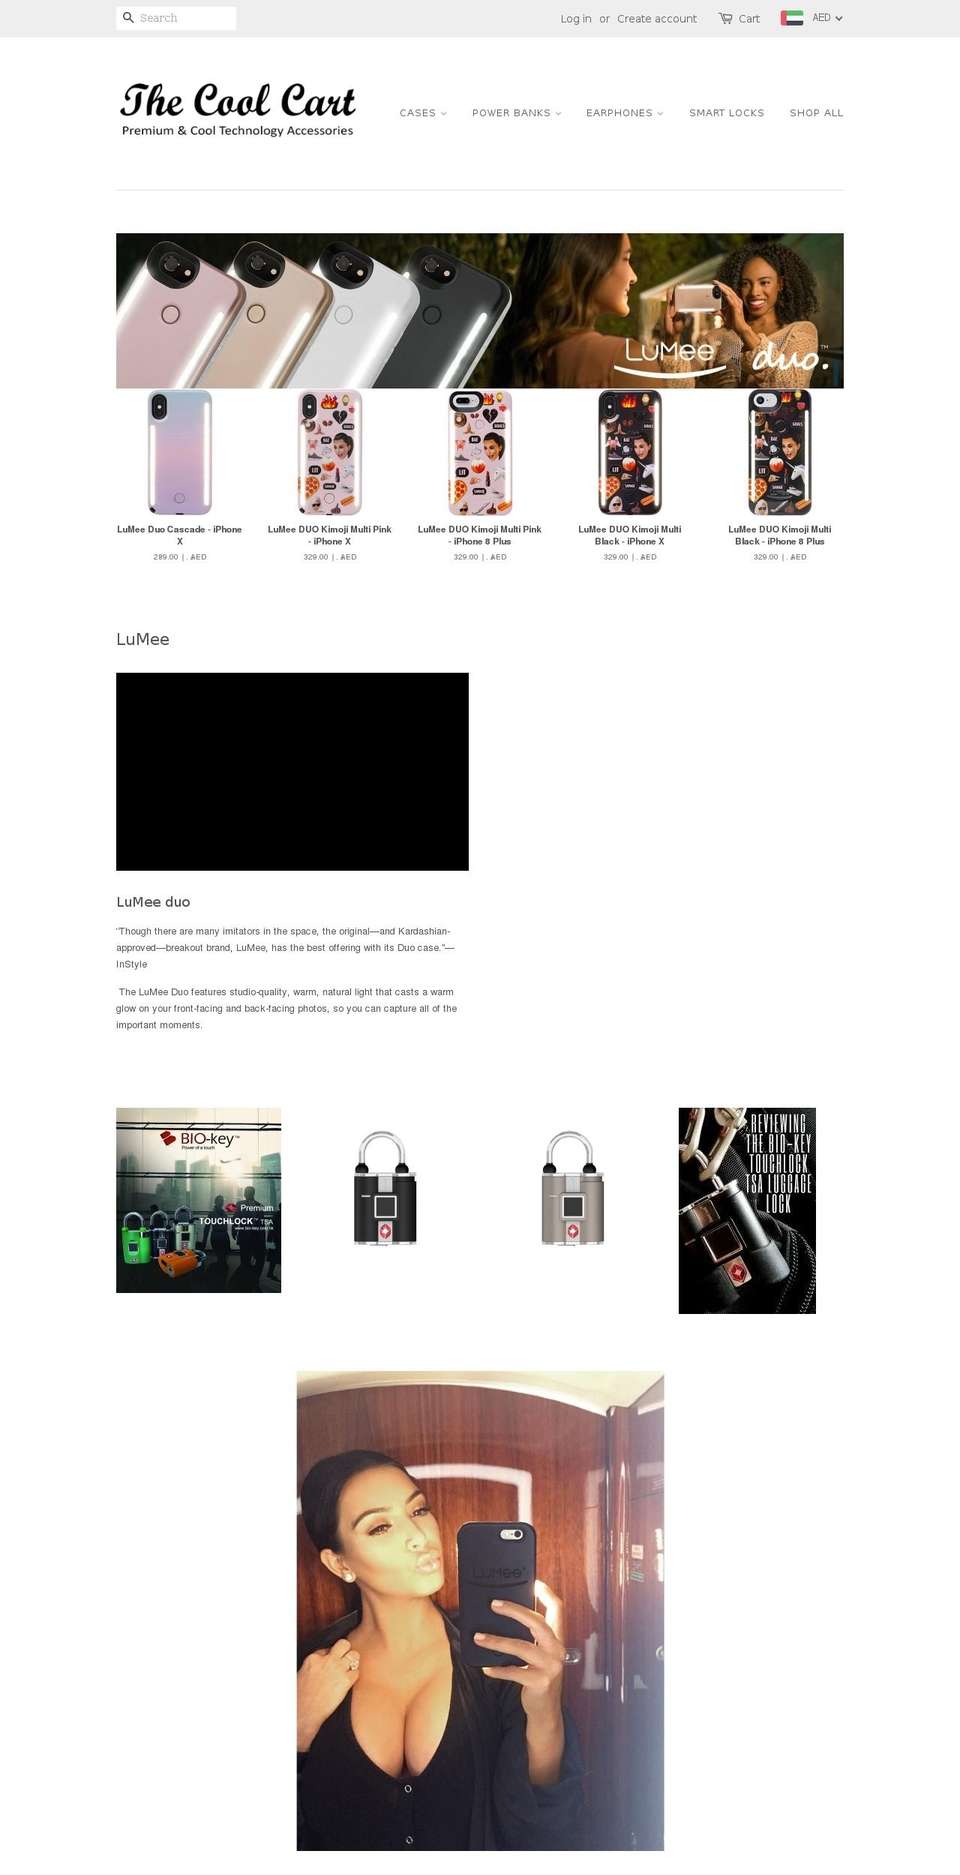 Gfruits-home Shopify theme site example thecoolcart.com